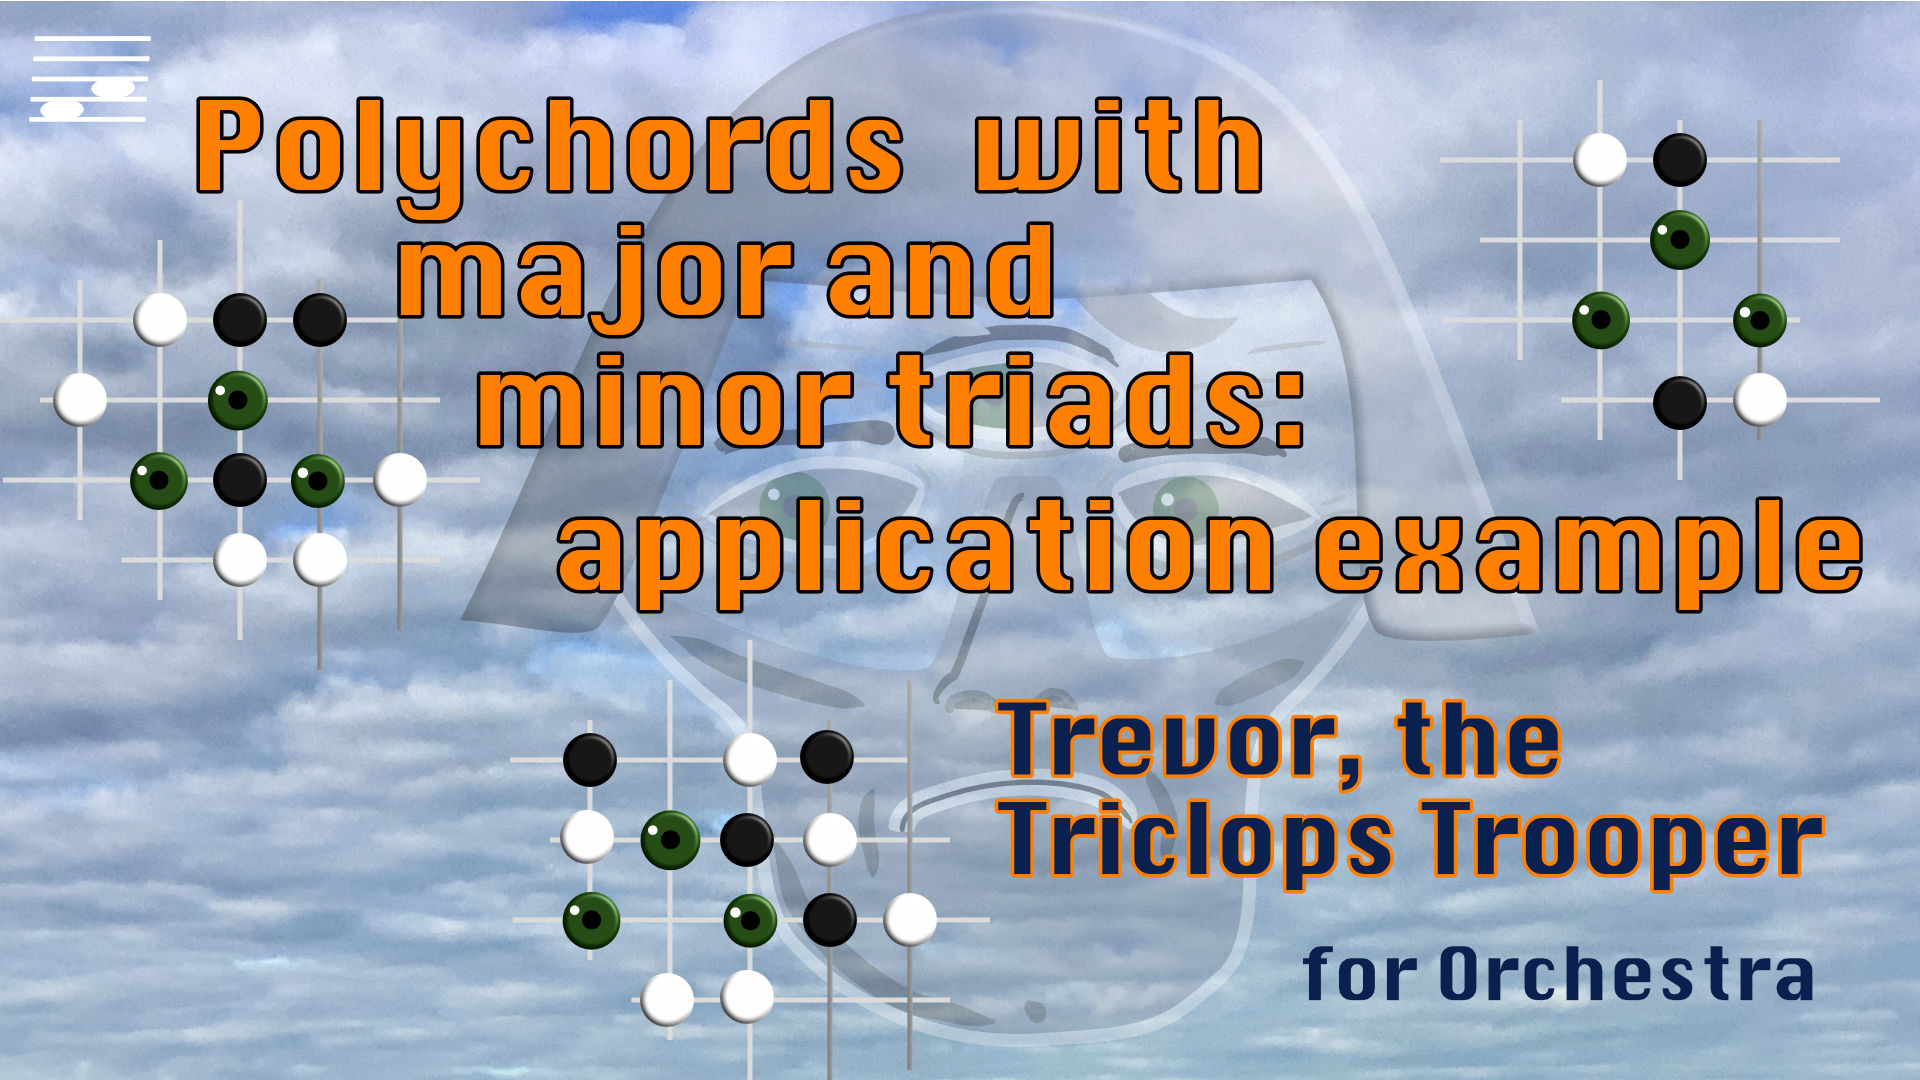 YouTube thumbnail for the Polychords with Major and Minor Triads: Application Example video tutorial